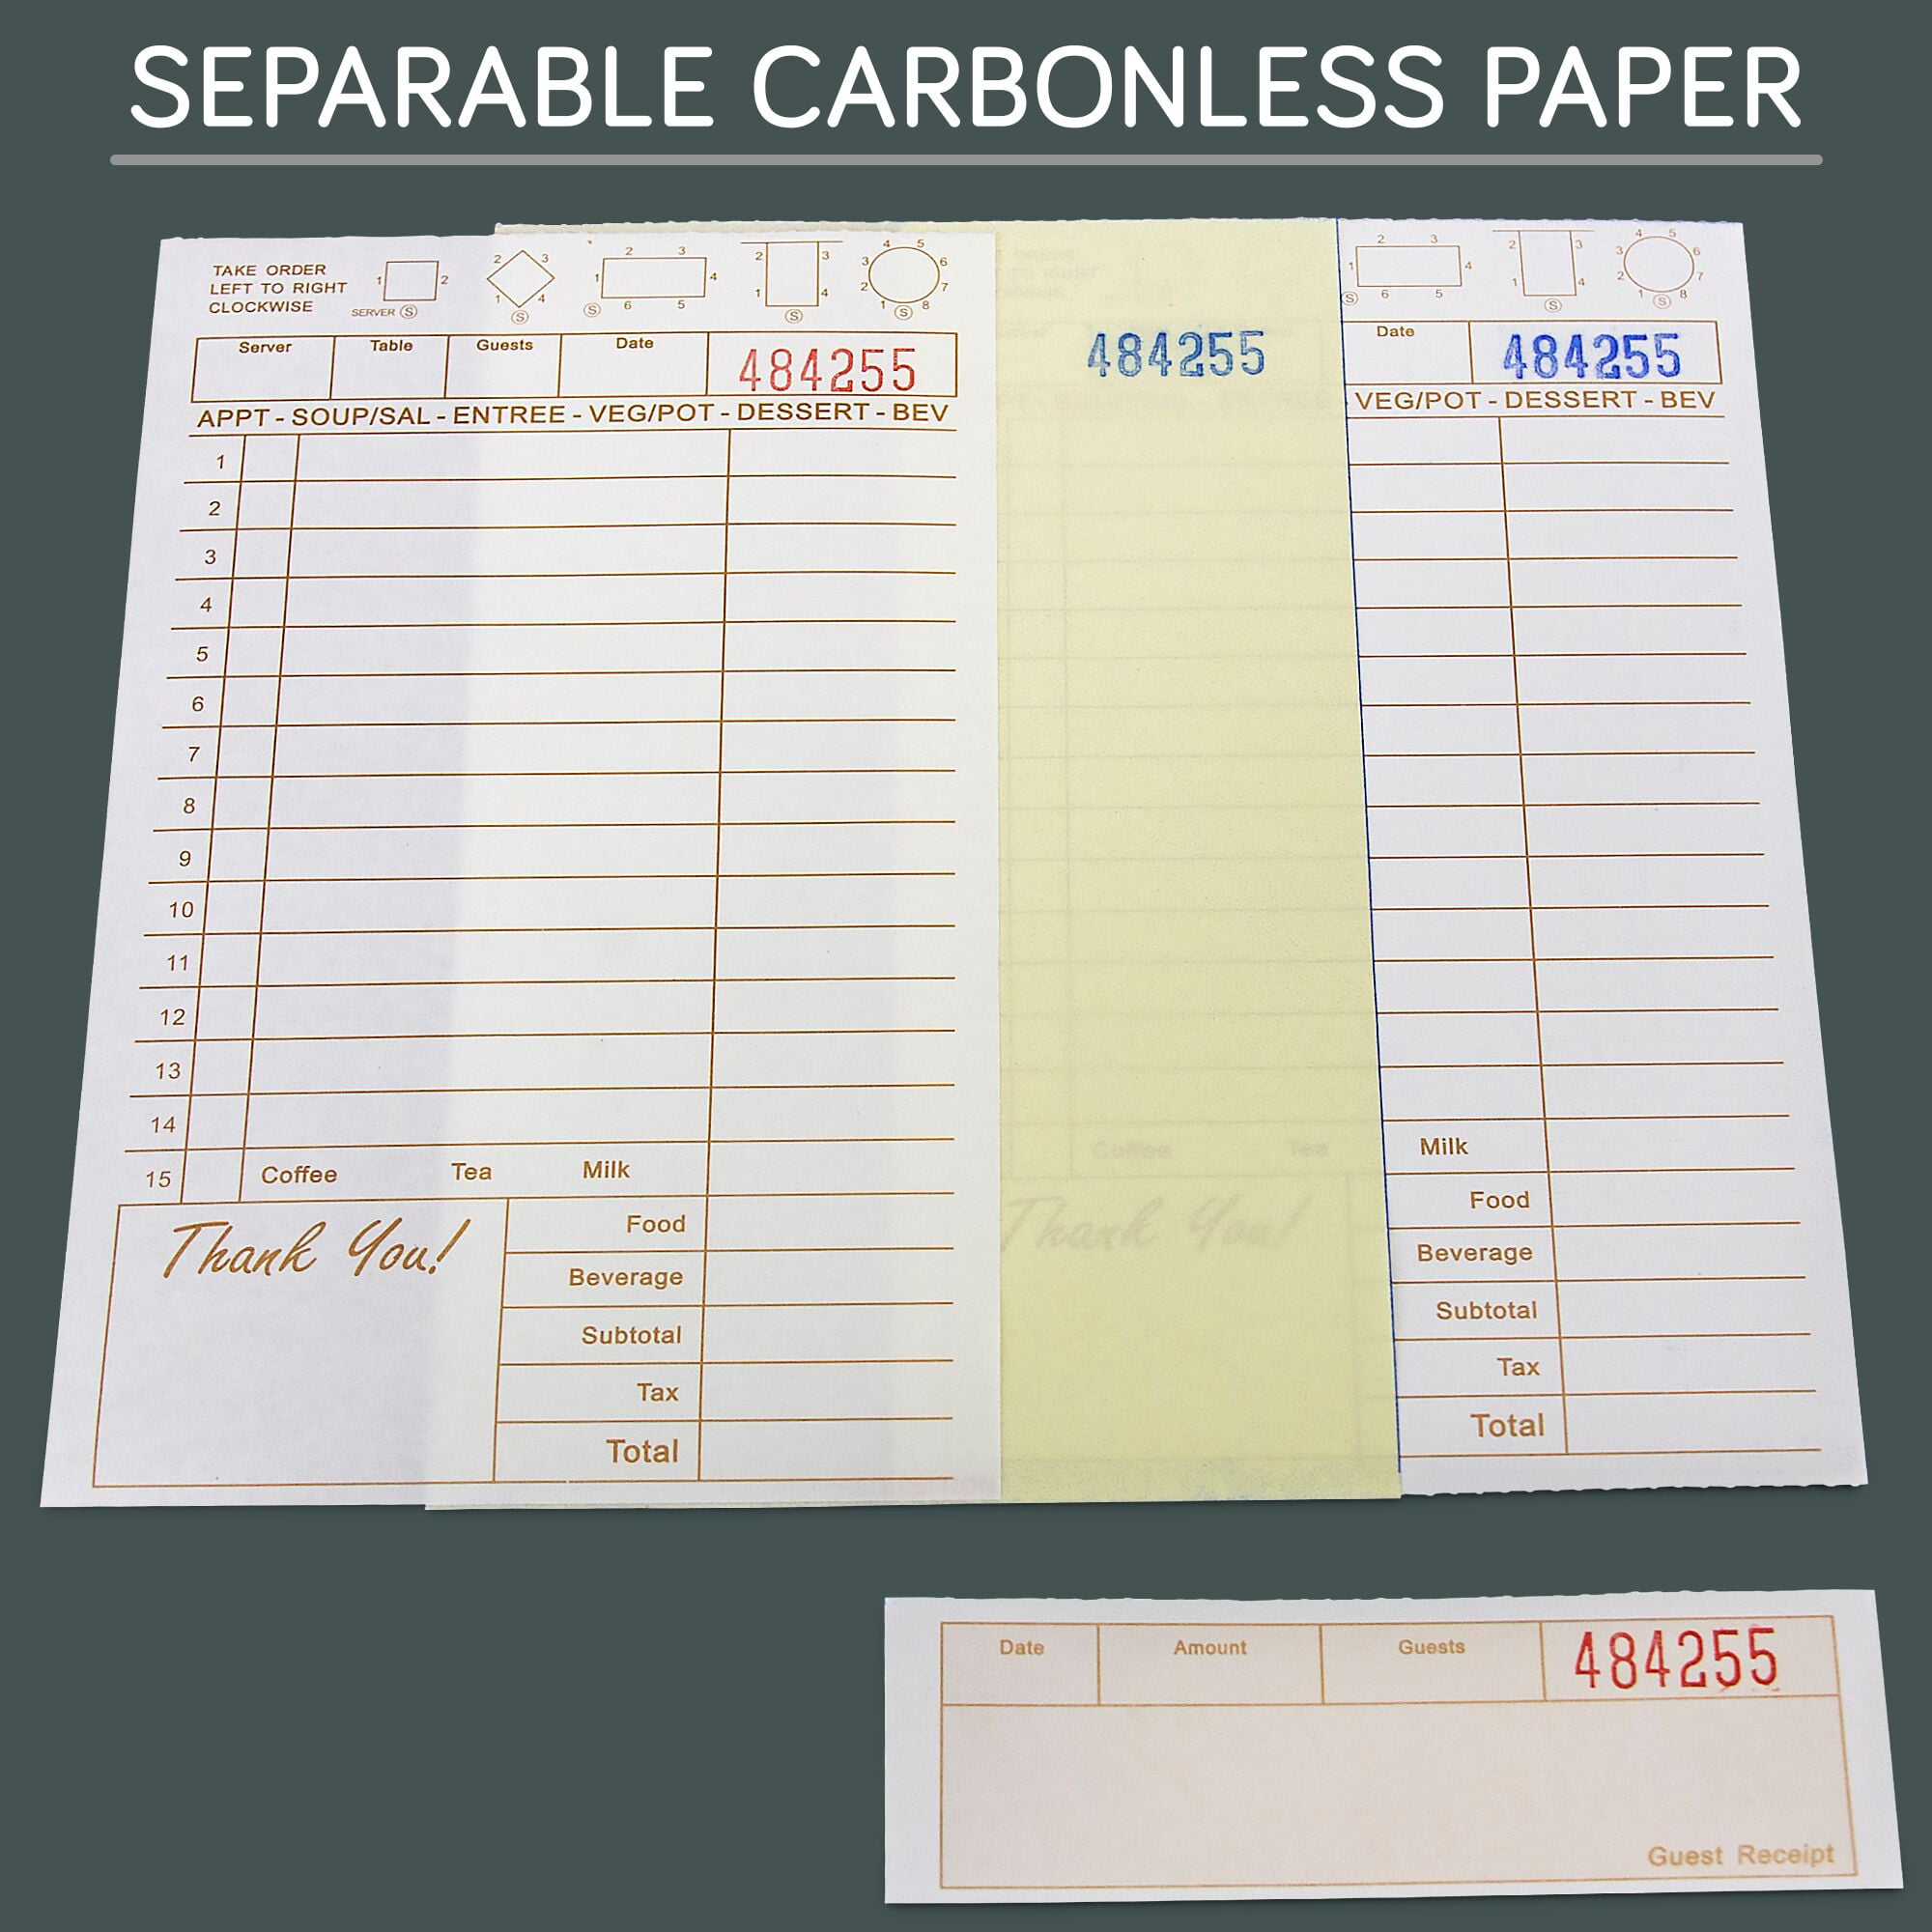 Classiky - Drop Around Record Pad - Carbon Paper Receipt